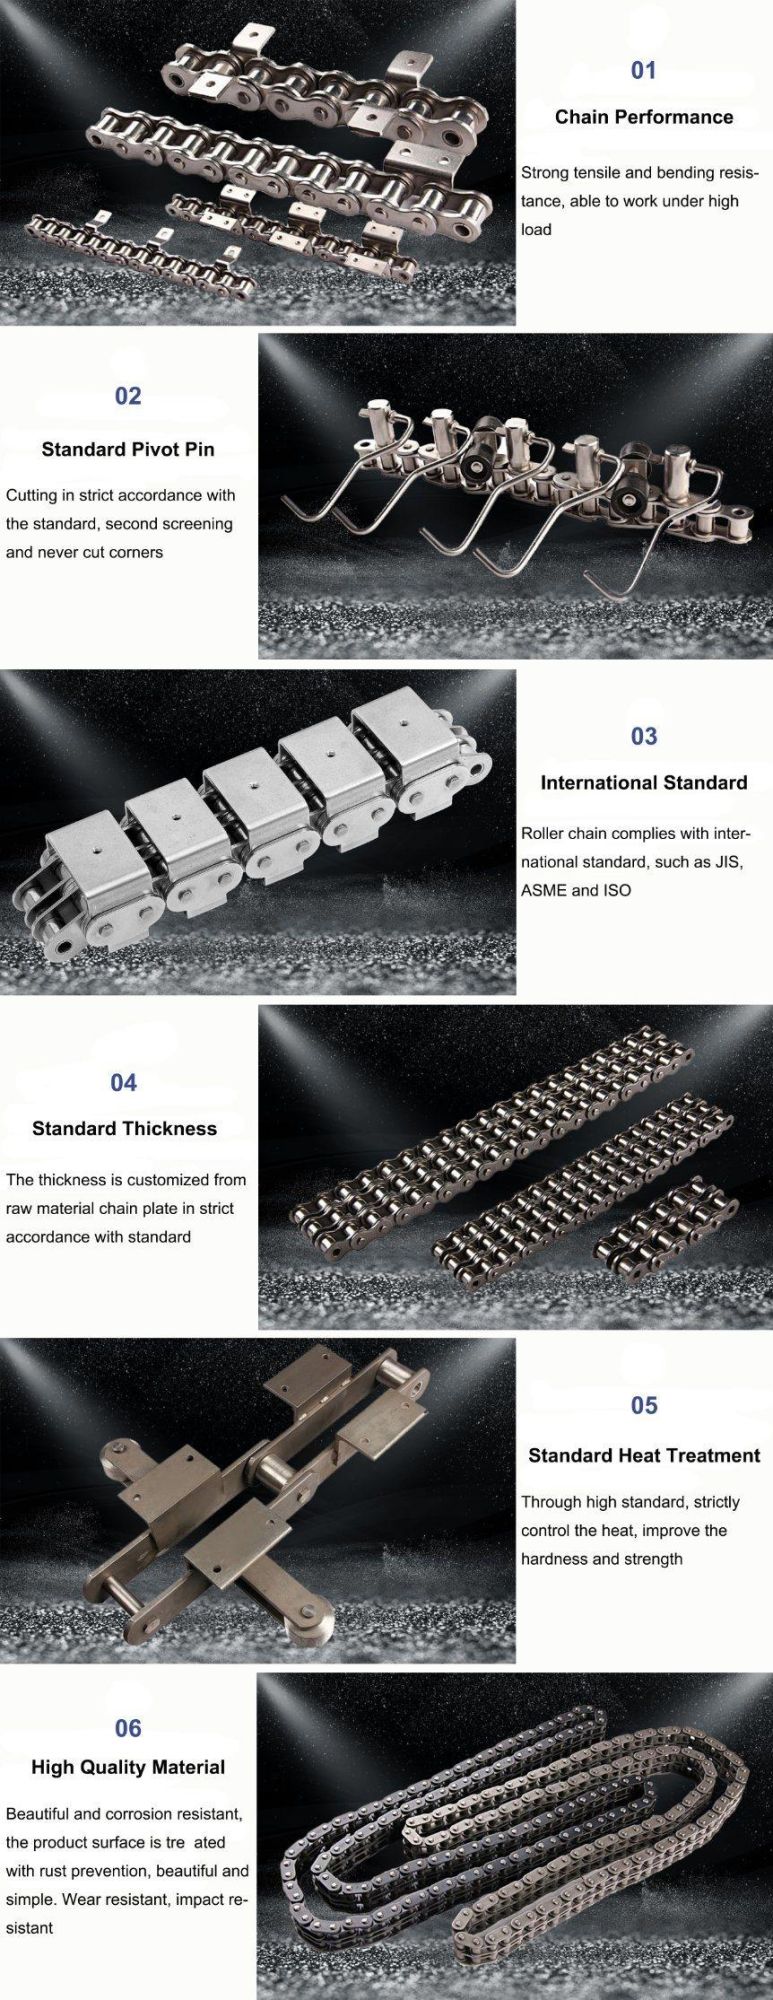 High Temperature Wear Resistant Chain Welded Roller Chains with Attachments